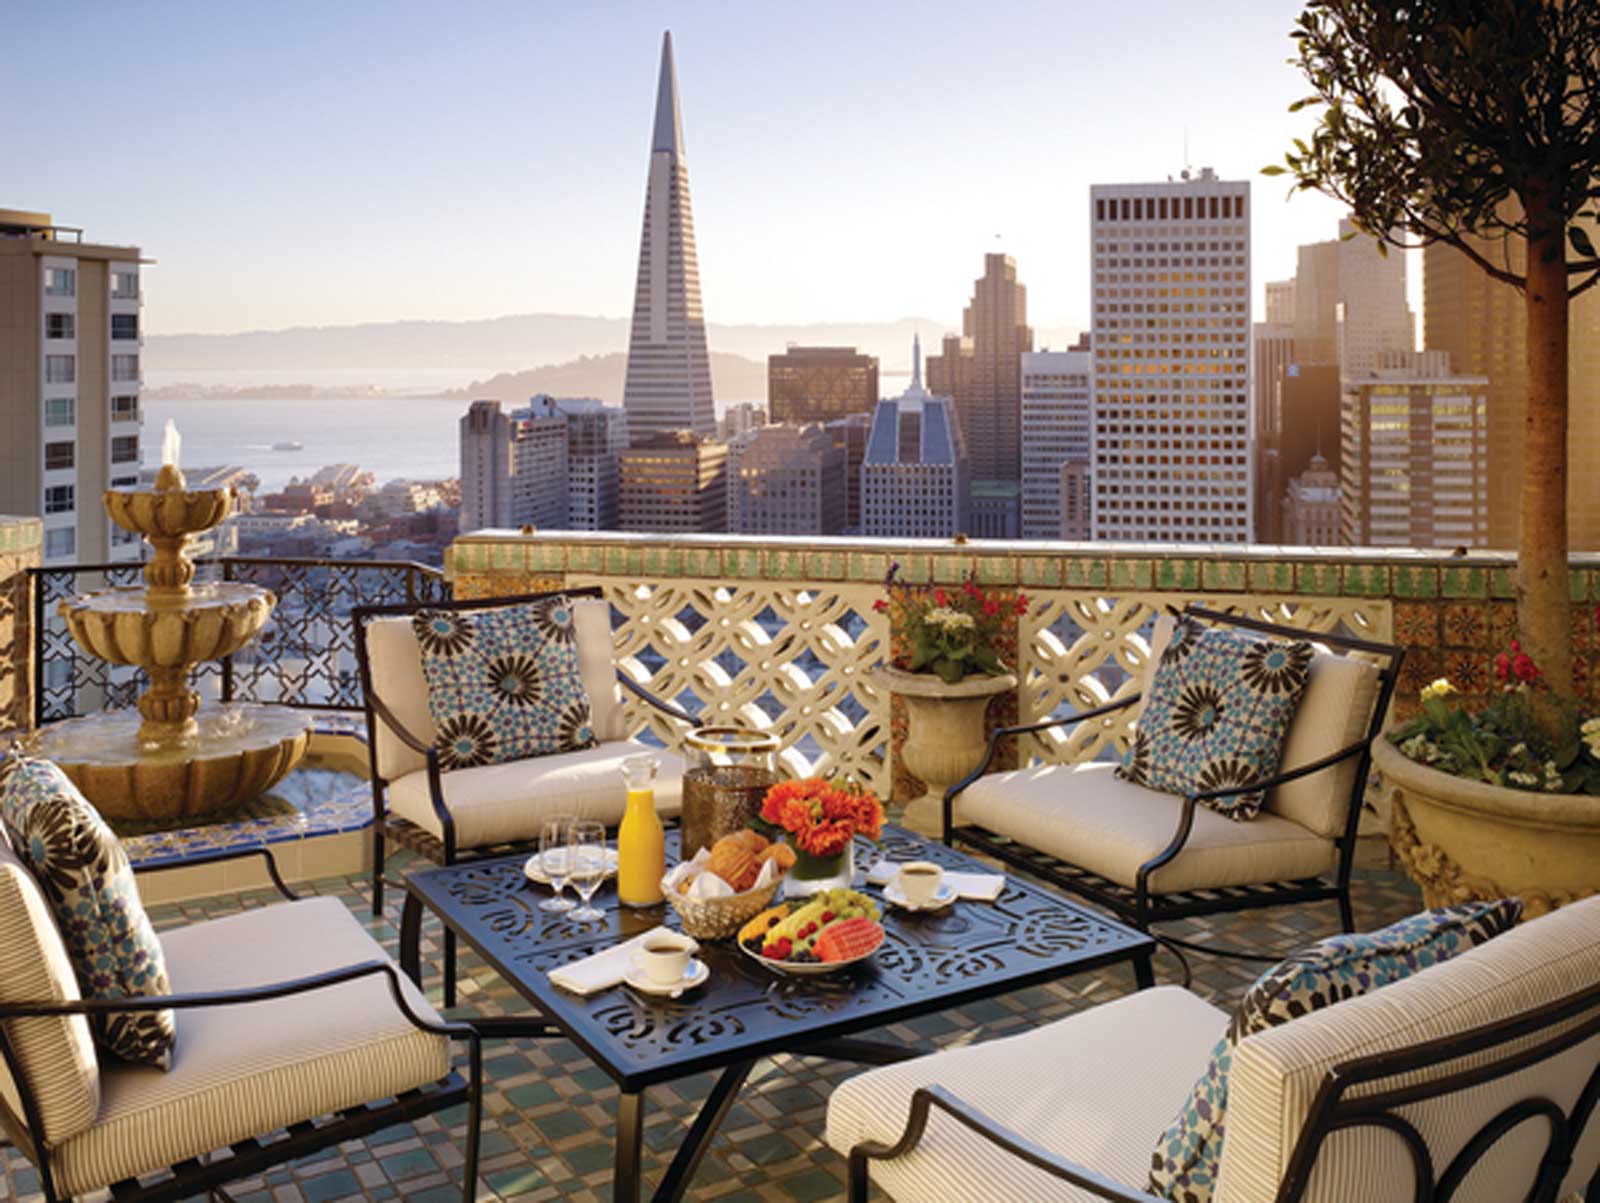 The view from the Penthouse Suite at Fairmont San Francisco 